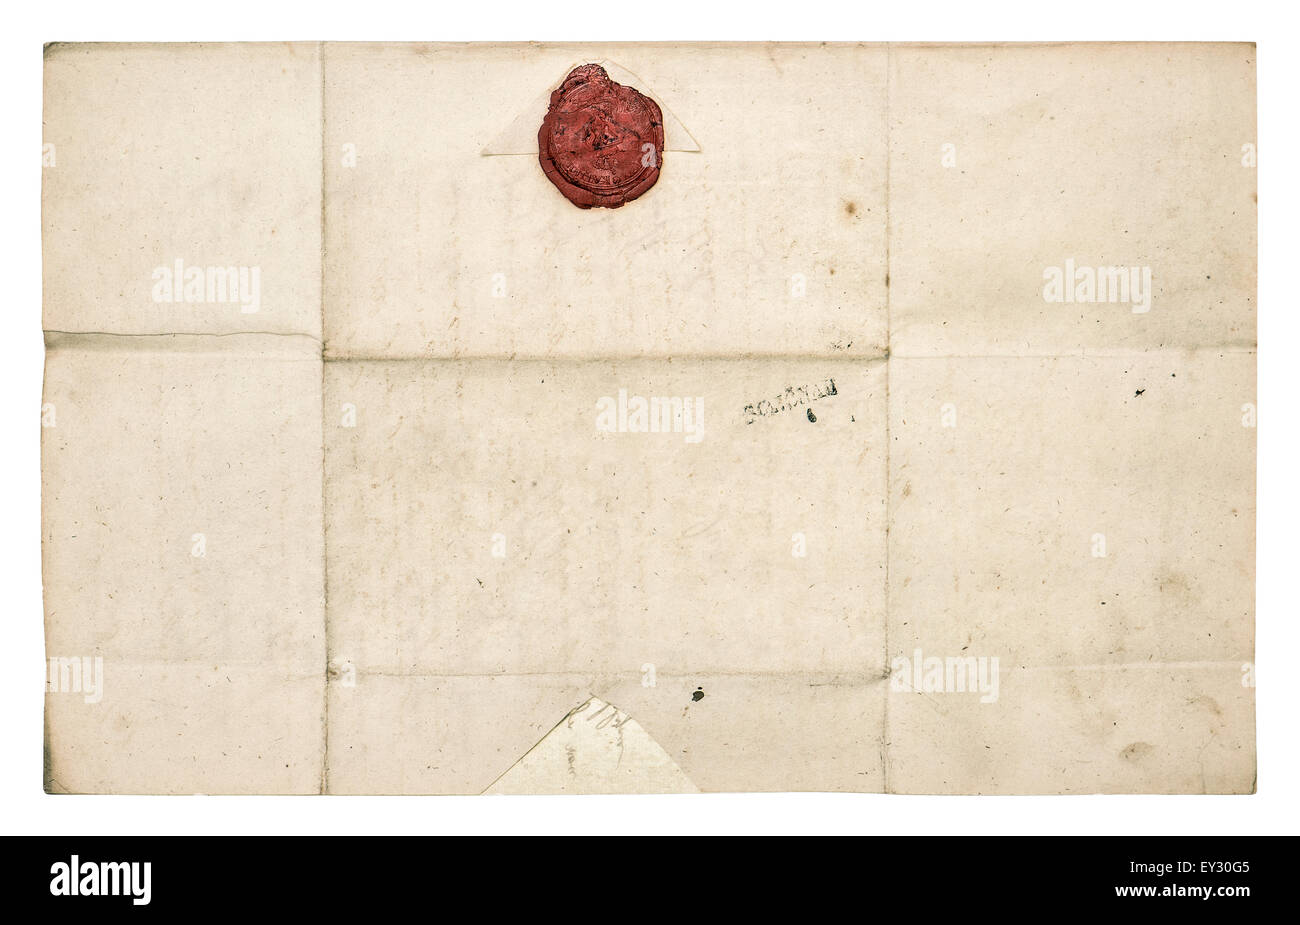 https://c8.alamy.com/comp/EY30G5/antique-paper-sheet-with-red-wax-seal-isolated-on-white-background-EY30G5.jpg